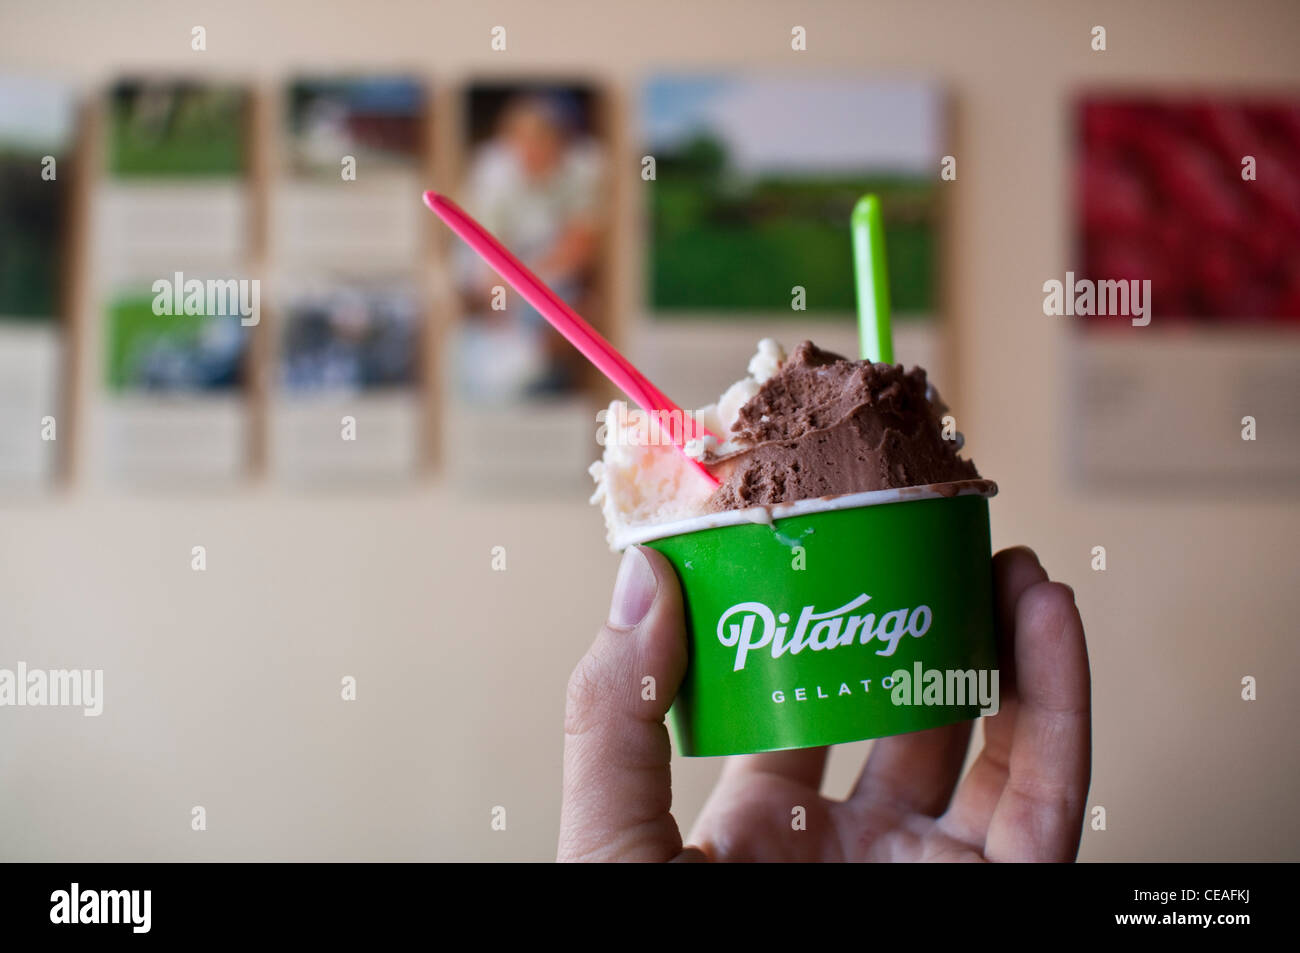 A cup of Pitango gelato with 2 flavors in the Fells Point neighborhood of Baltimore, MD. Stock Photo